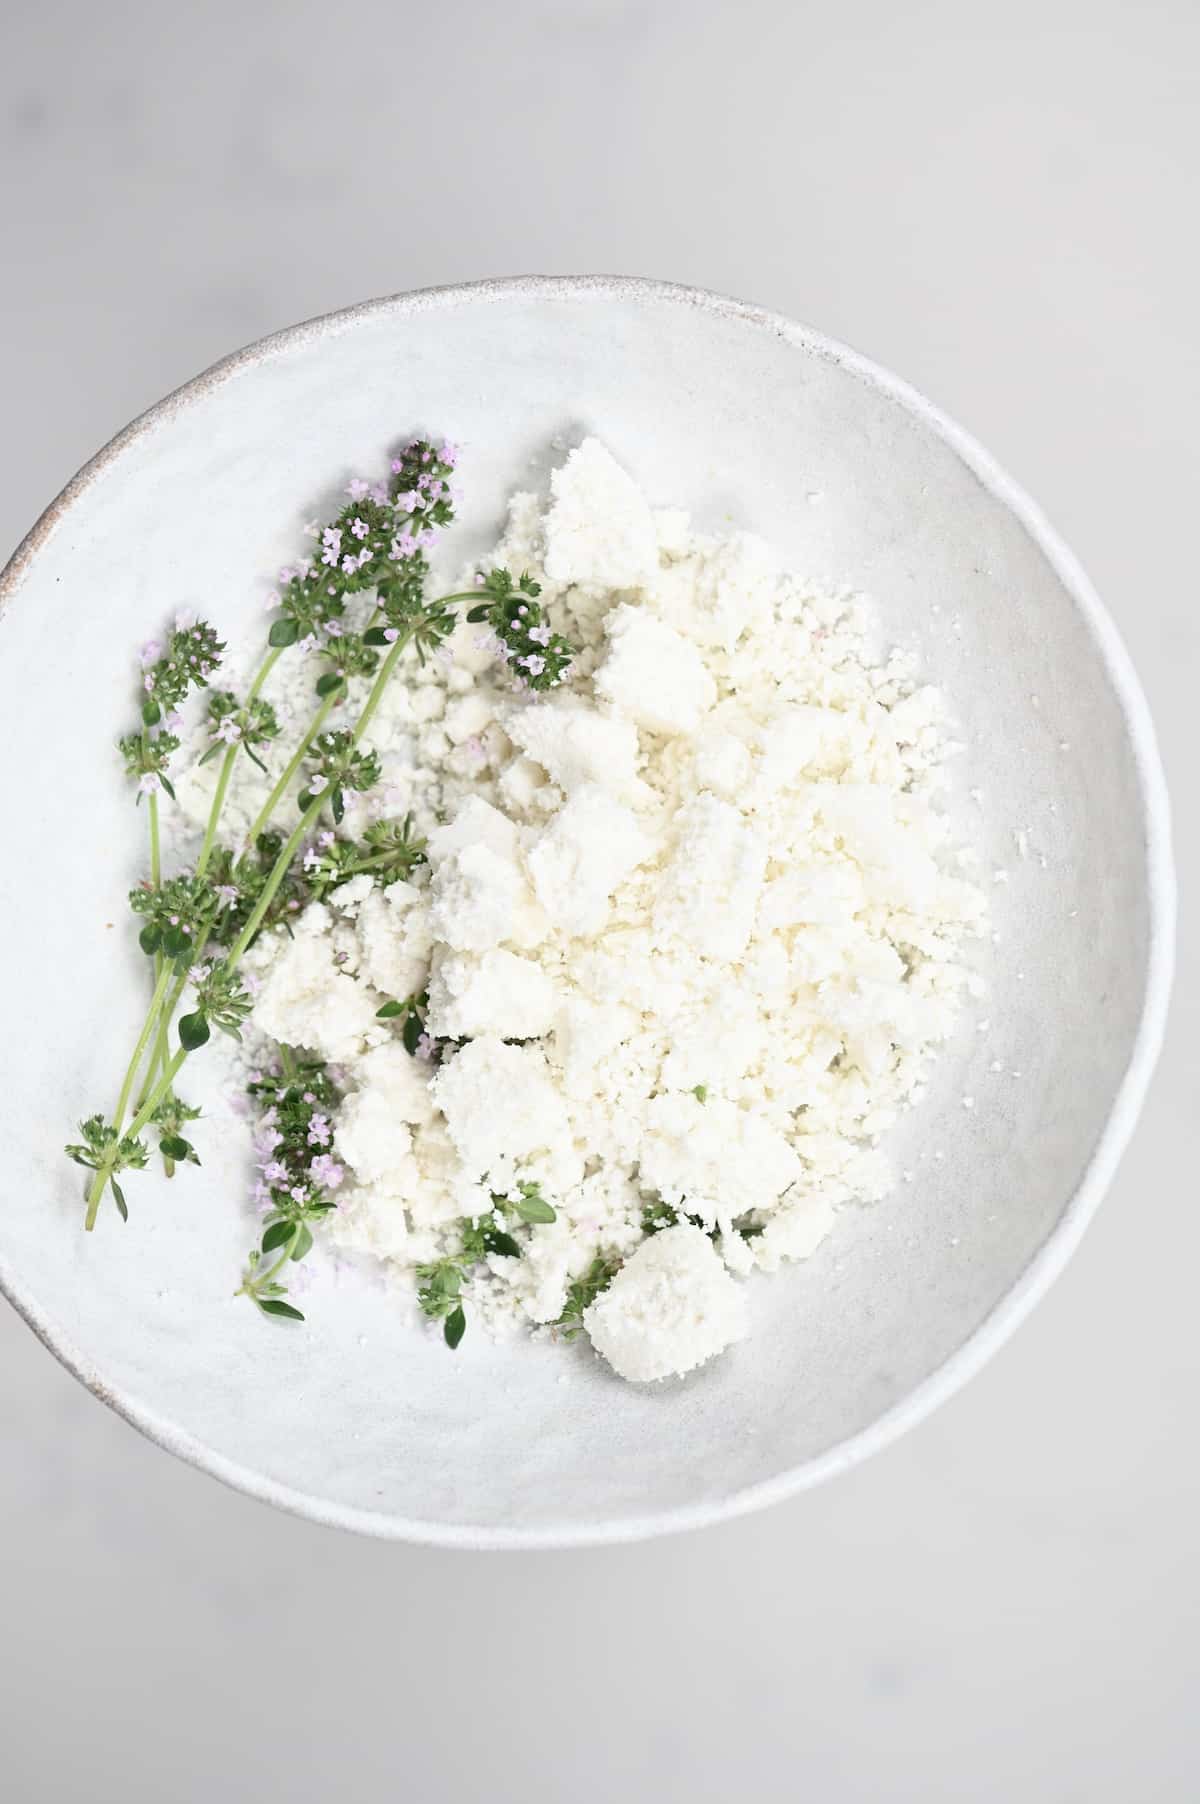 Crumbled goats cheese with herbs in a white plate